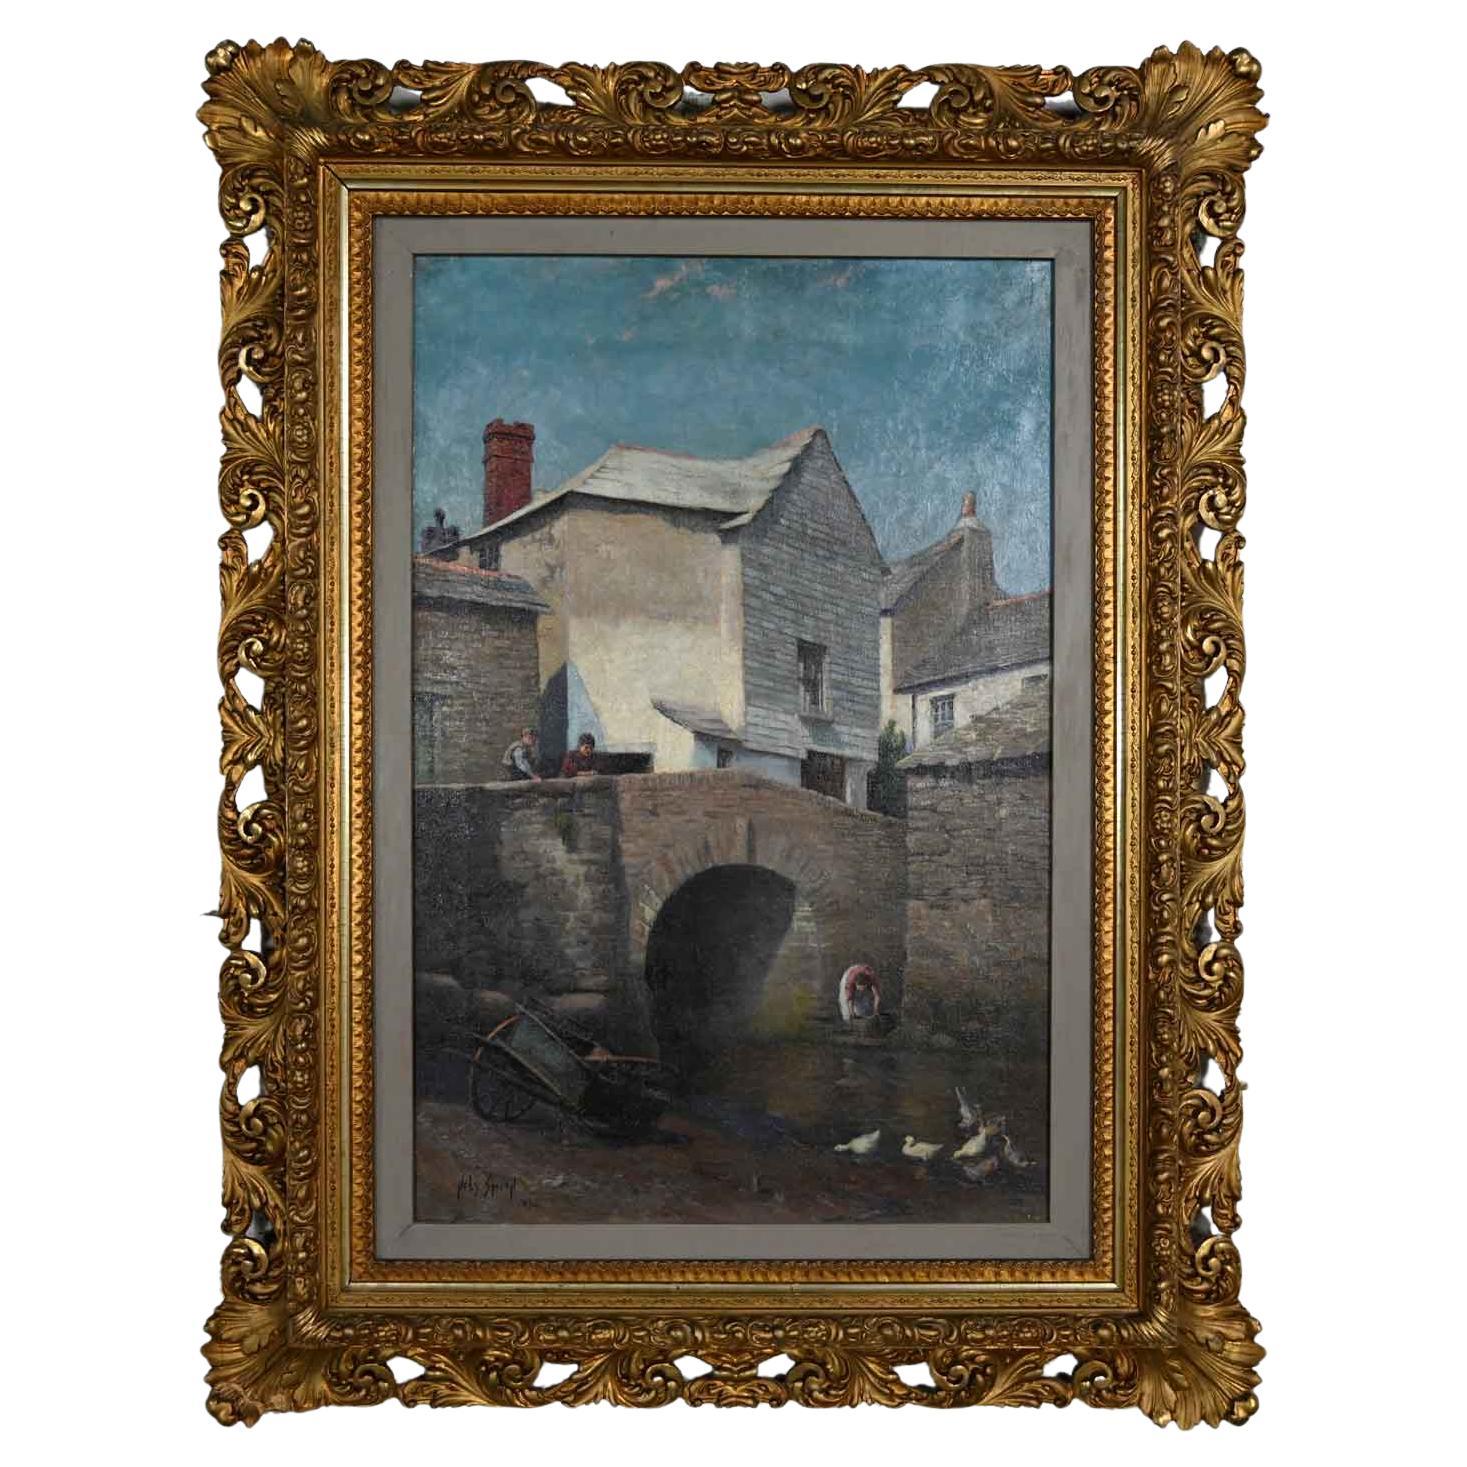 1896 Realism Landscape Oil Painting of Polperro by Hely Smith Orig Gilded Frame